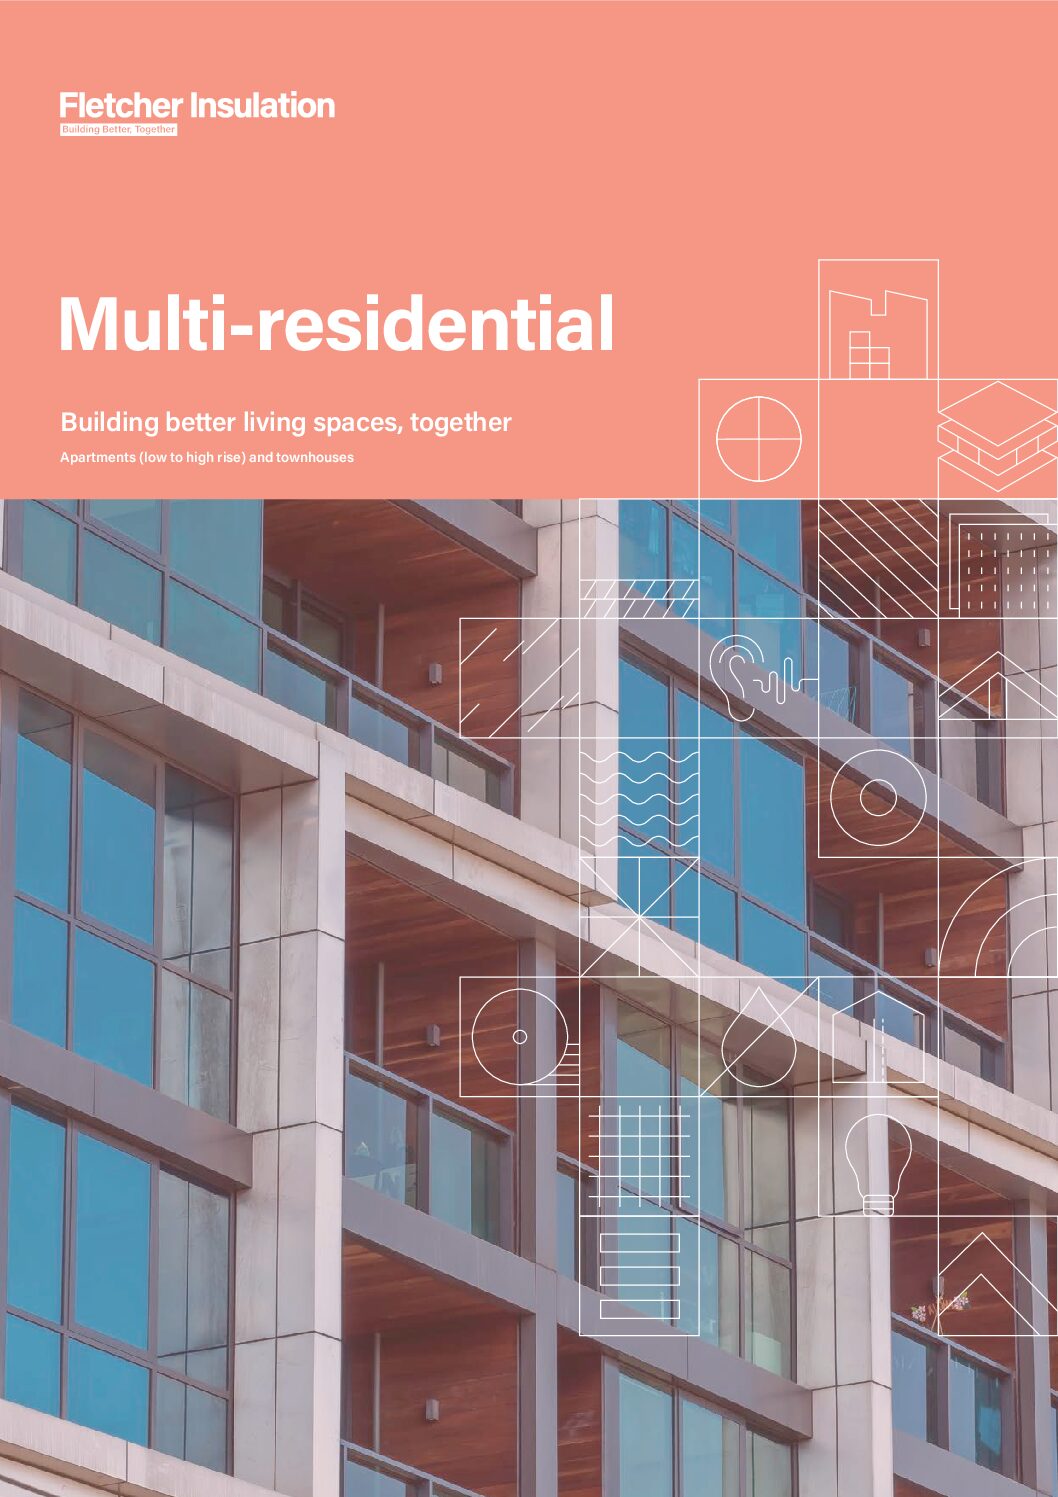 Multi-residential – Building Better Living Spaces